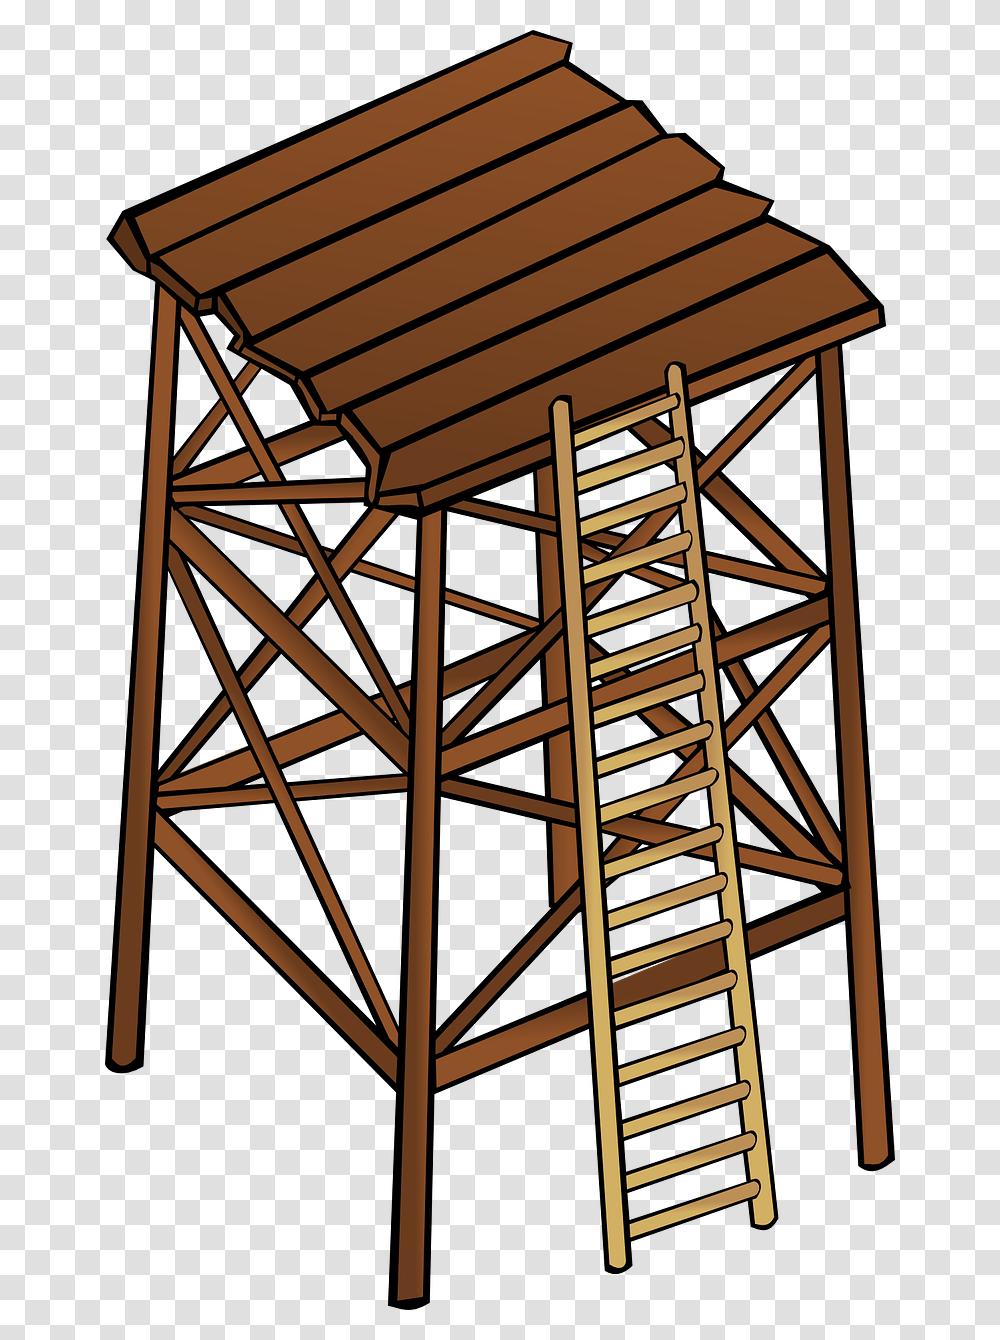 Watchtower, Wood, Staircase, Construction, Gate Transparent Png